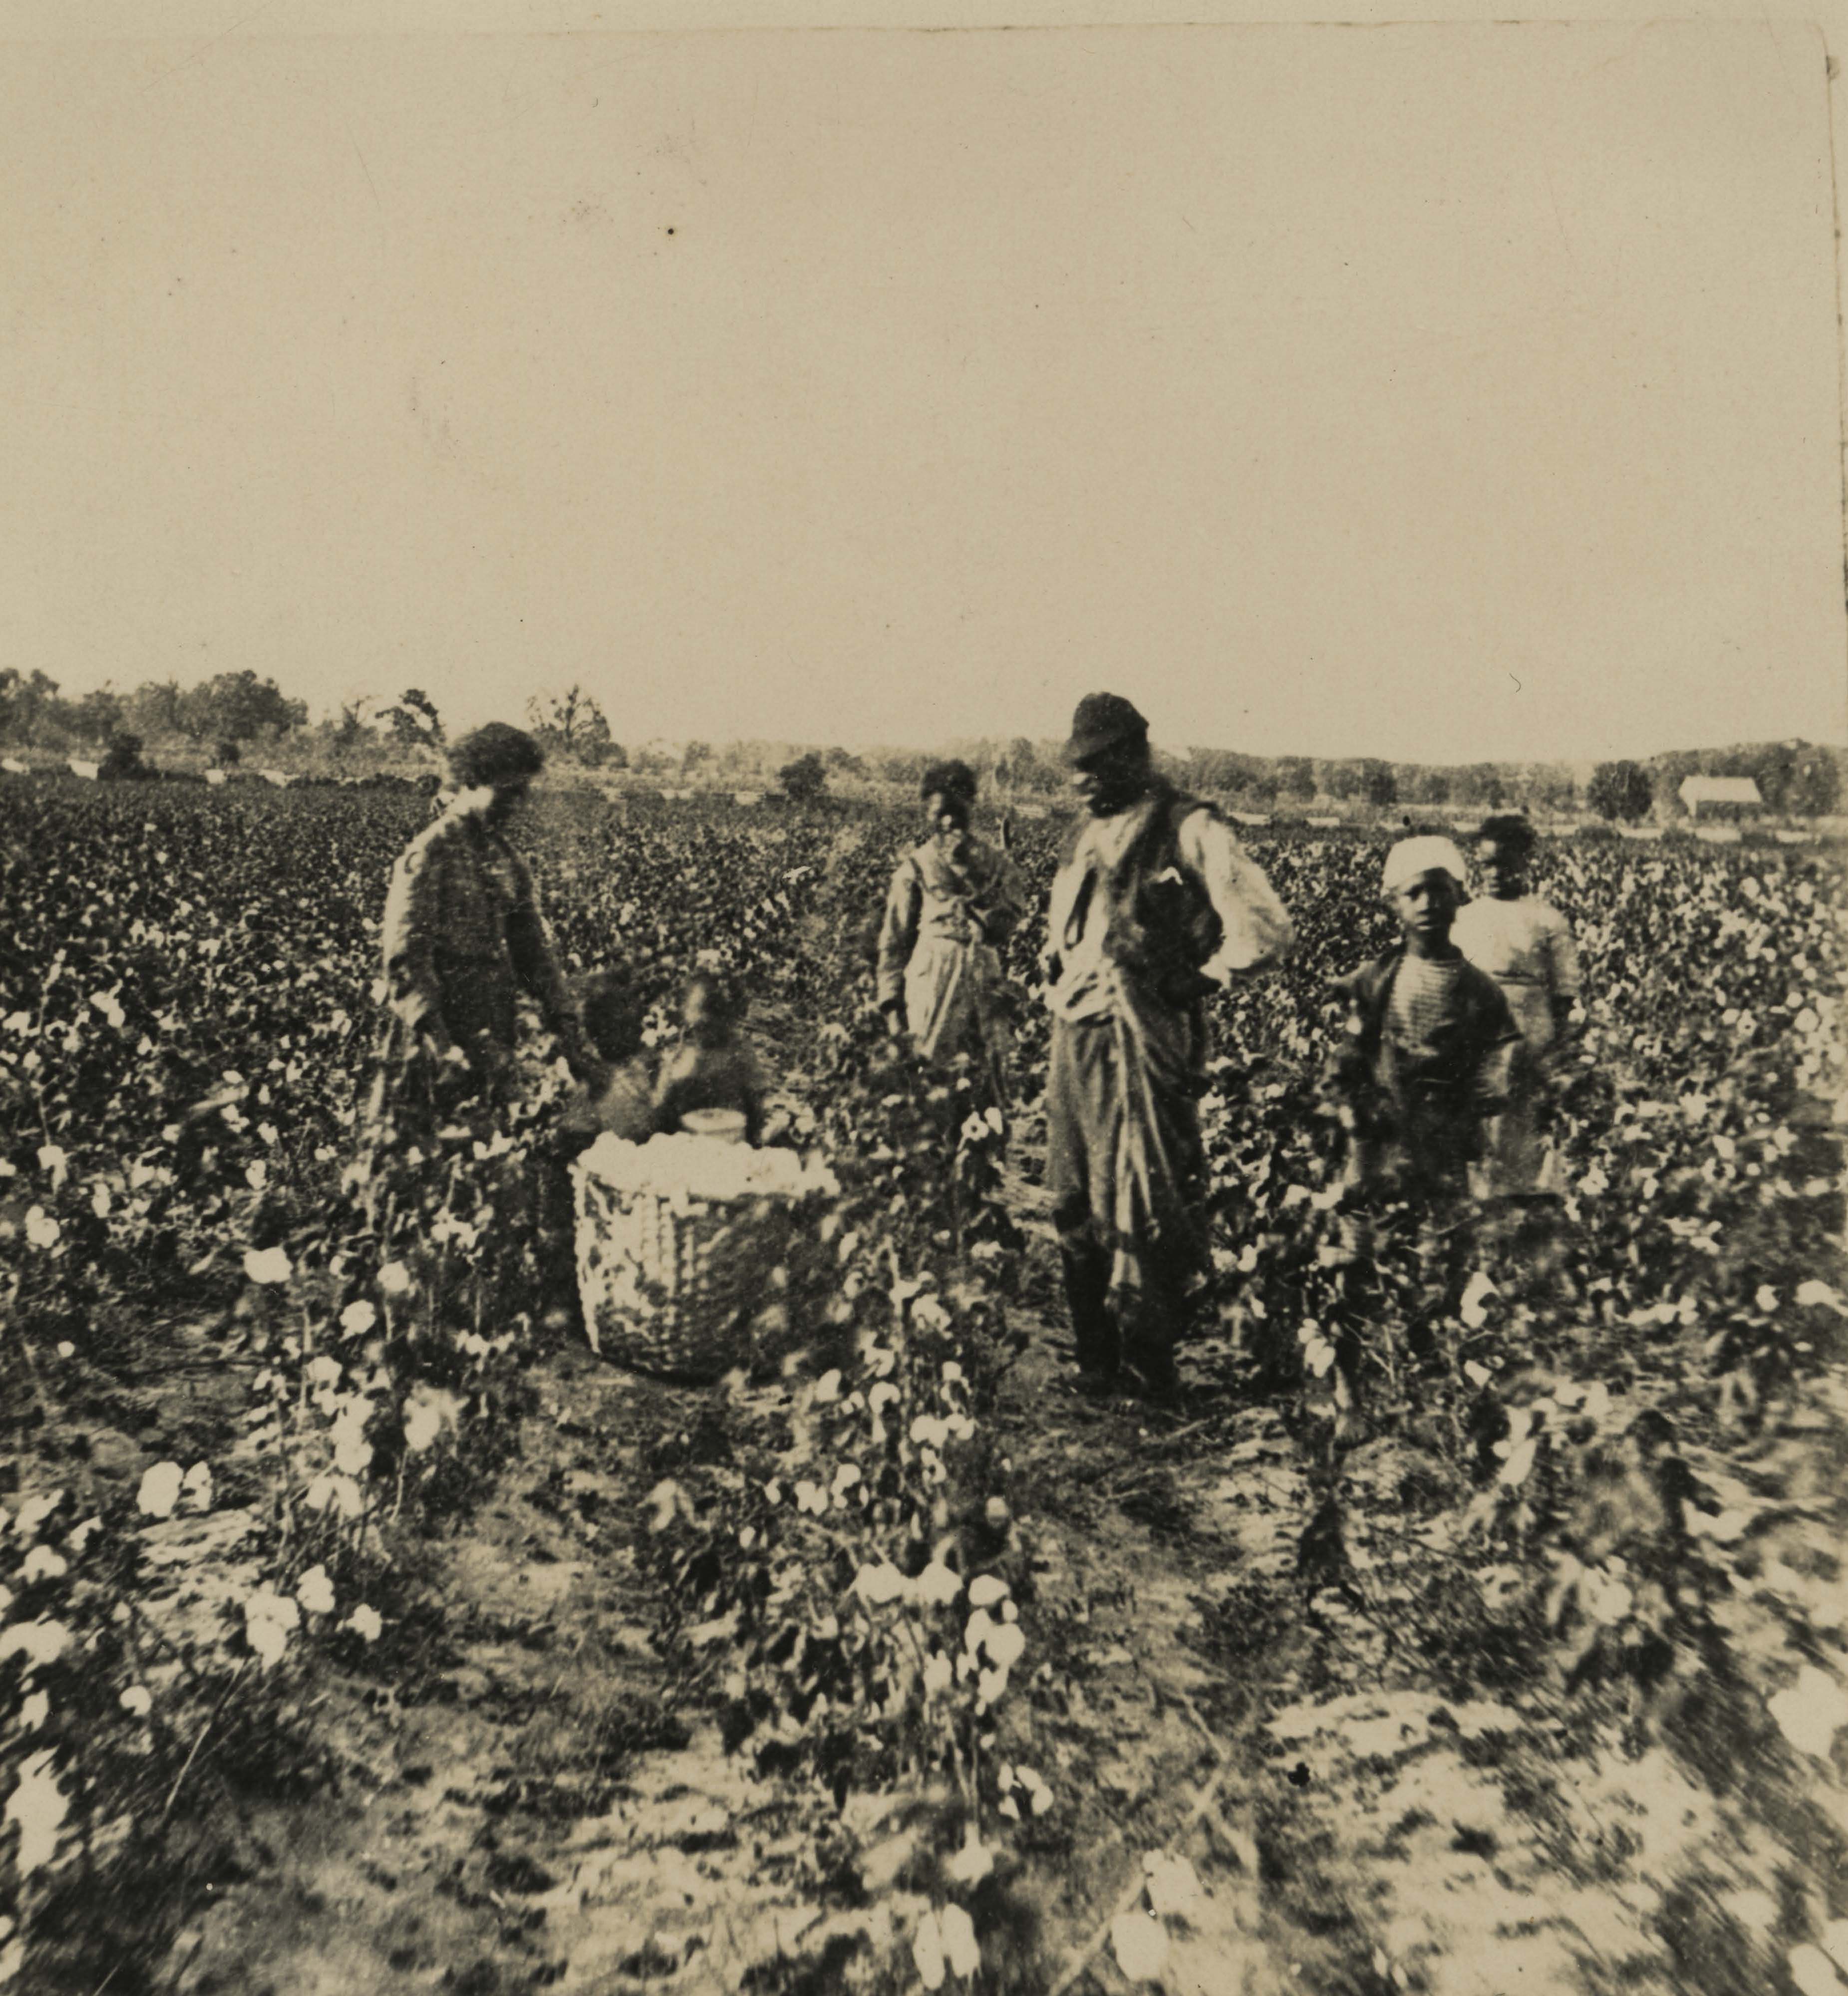 Photograph of a family of African Americans working in a cotton field